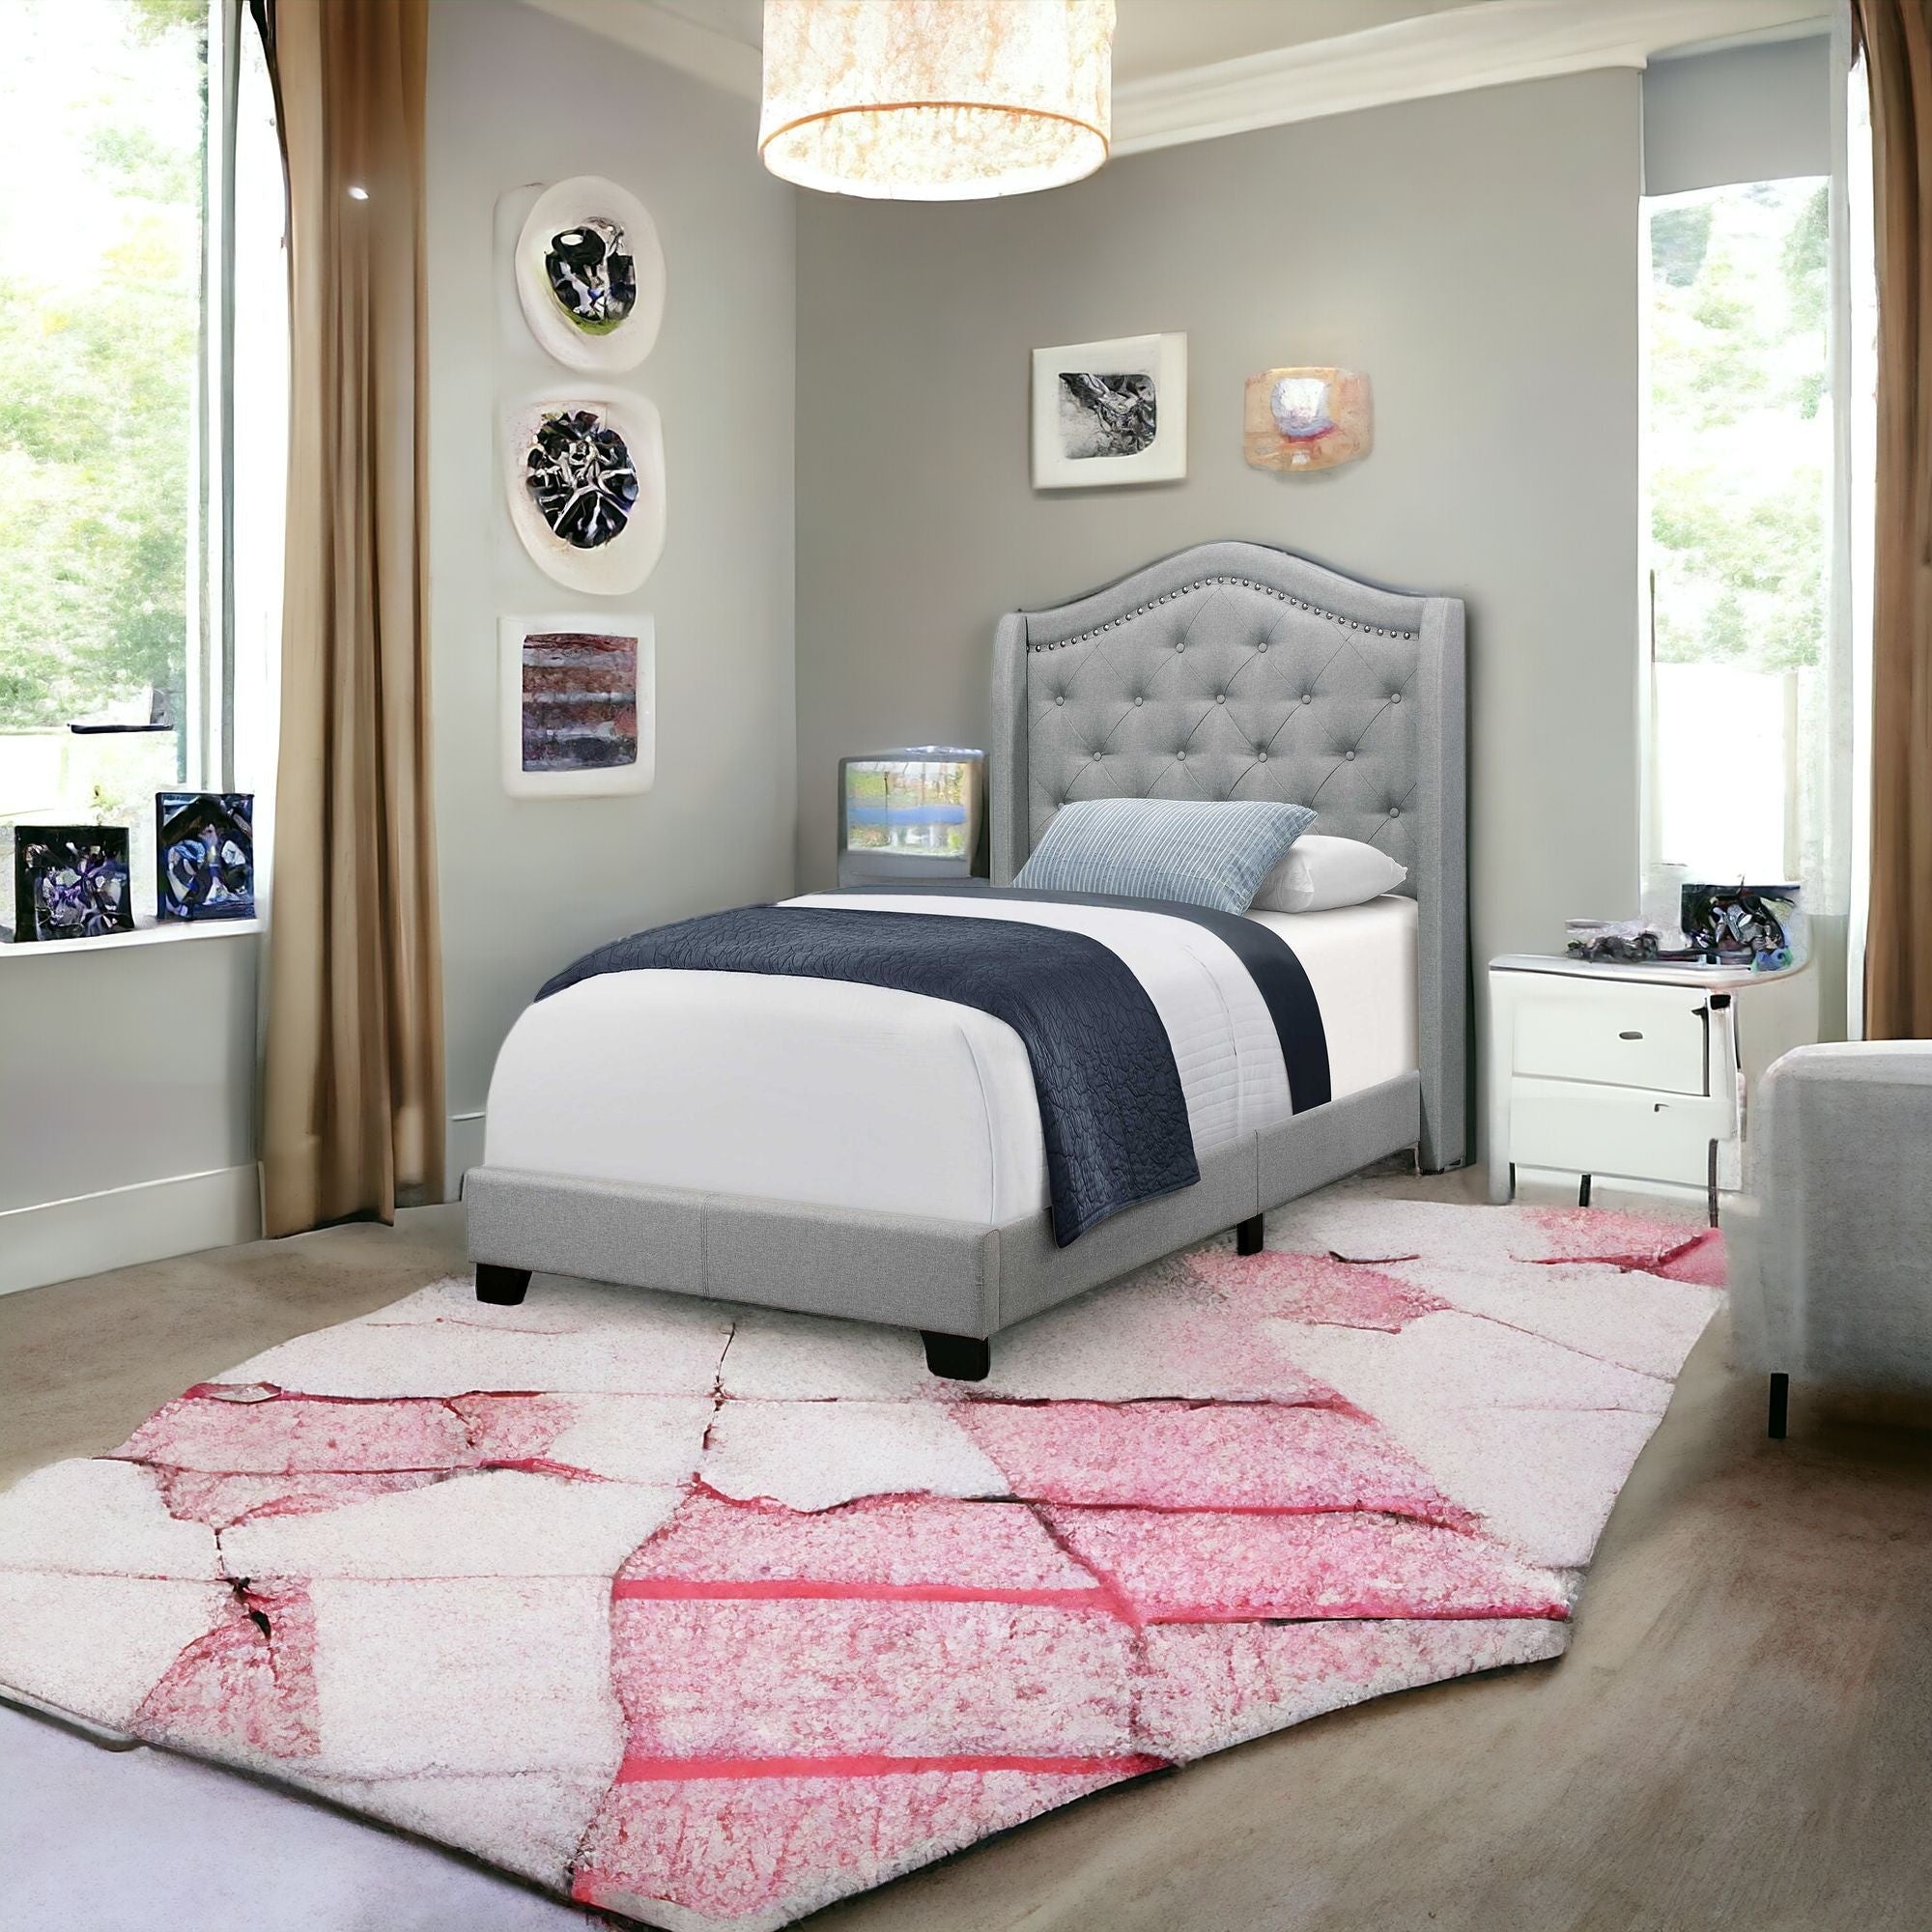 Tufted Grey Standard Bed Upholstered With Nailhead Trim And With Headboard